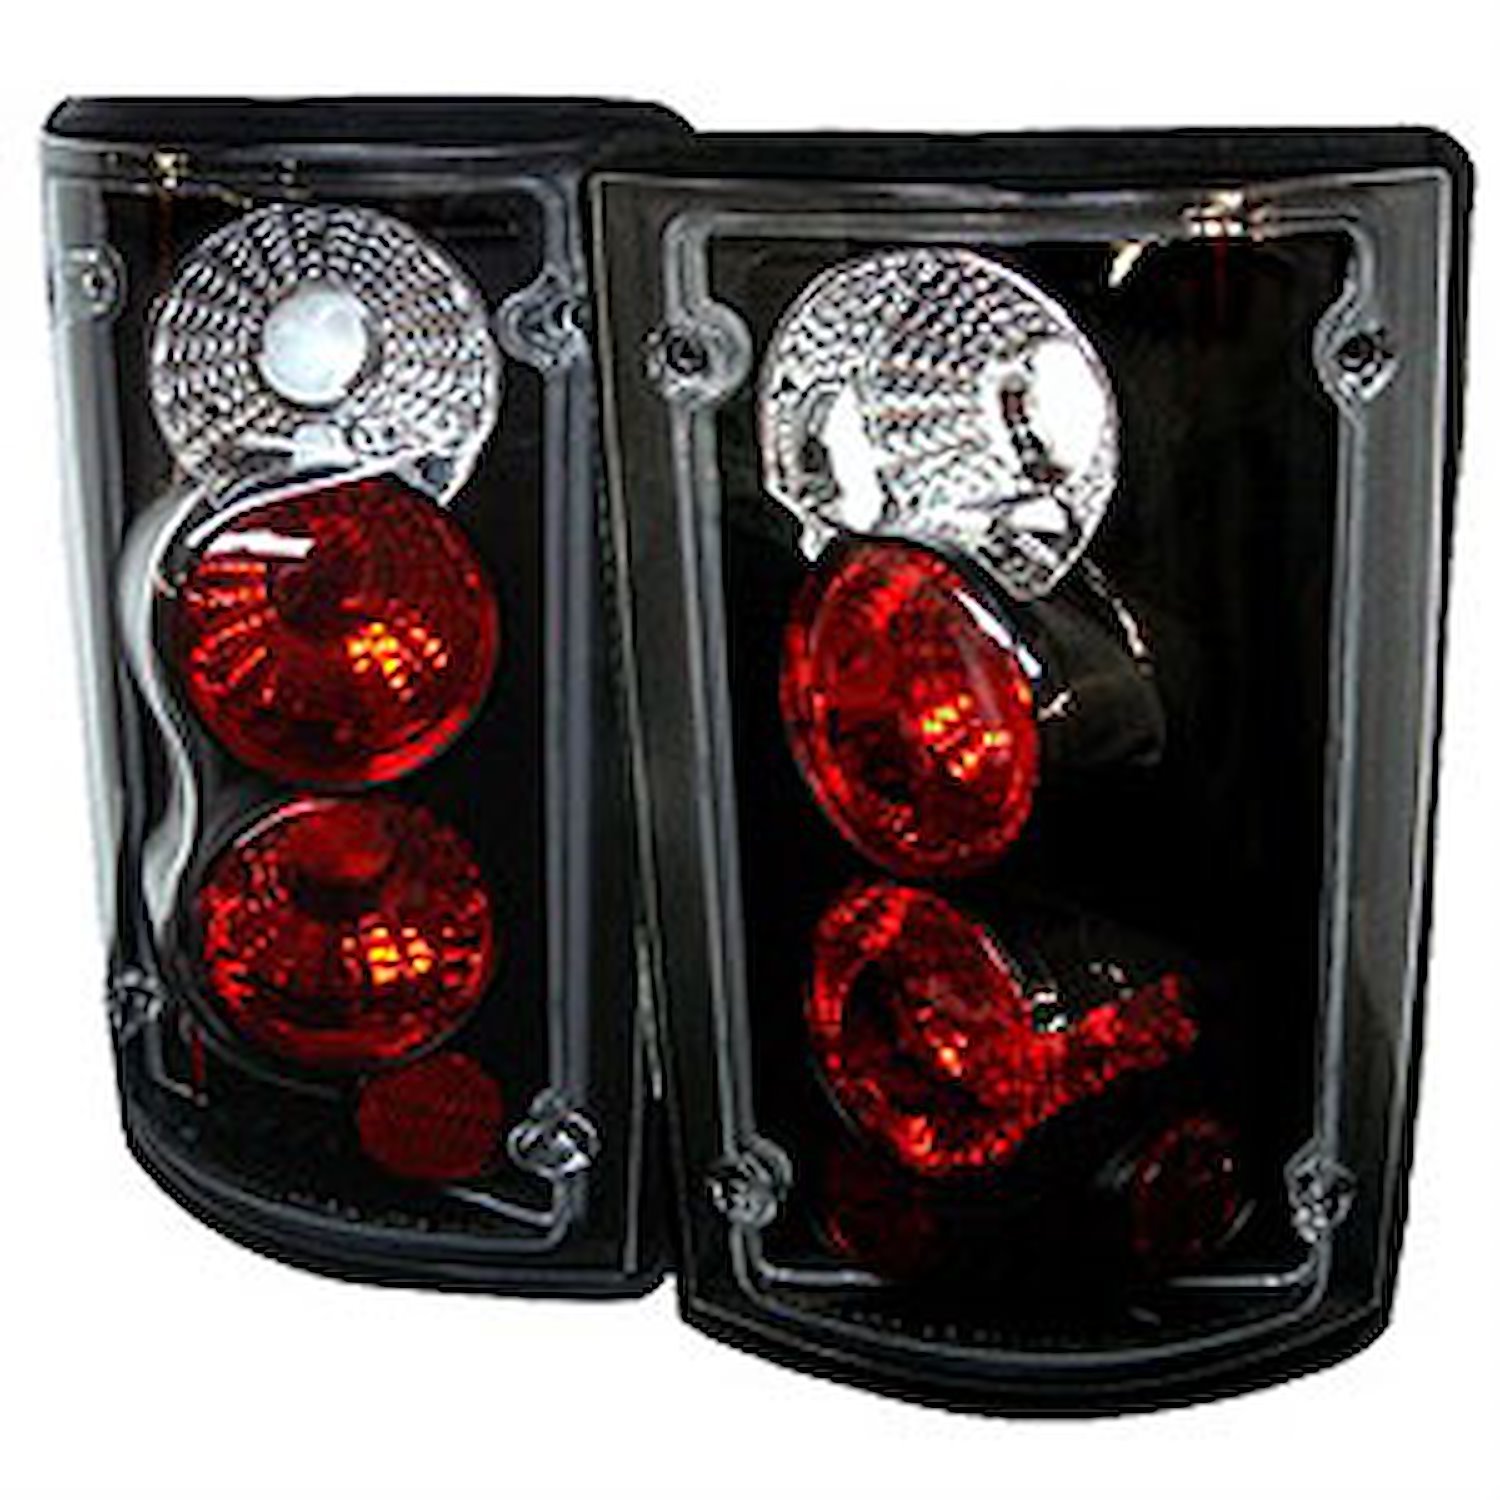 Euro Tail Lights 2000-2006 Ford Excursion